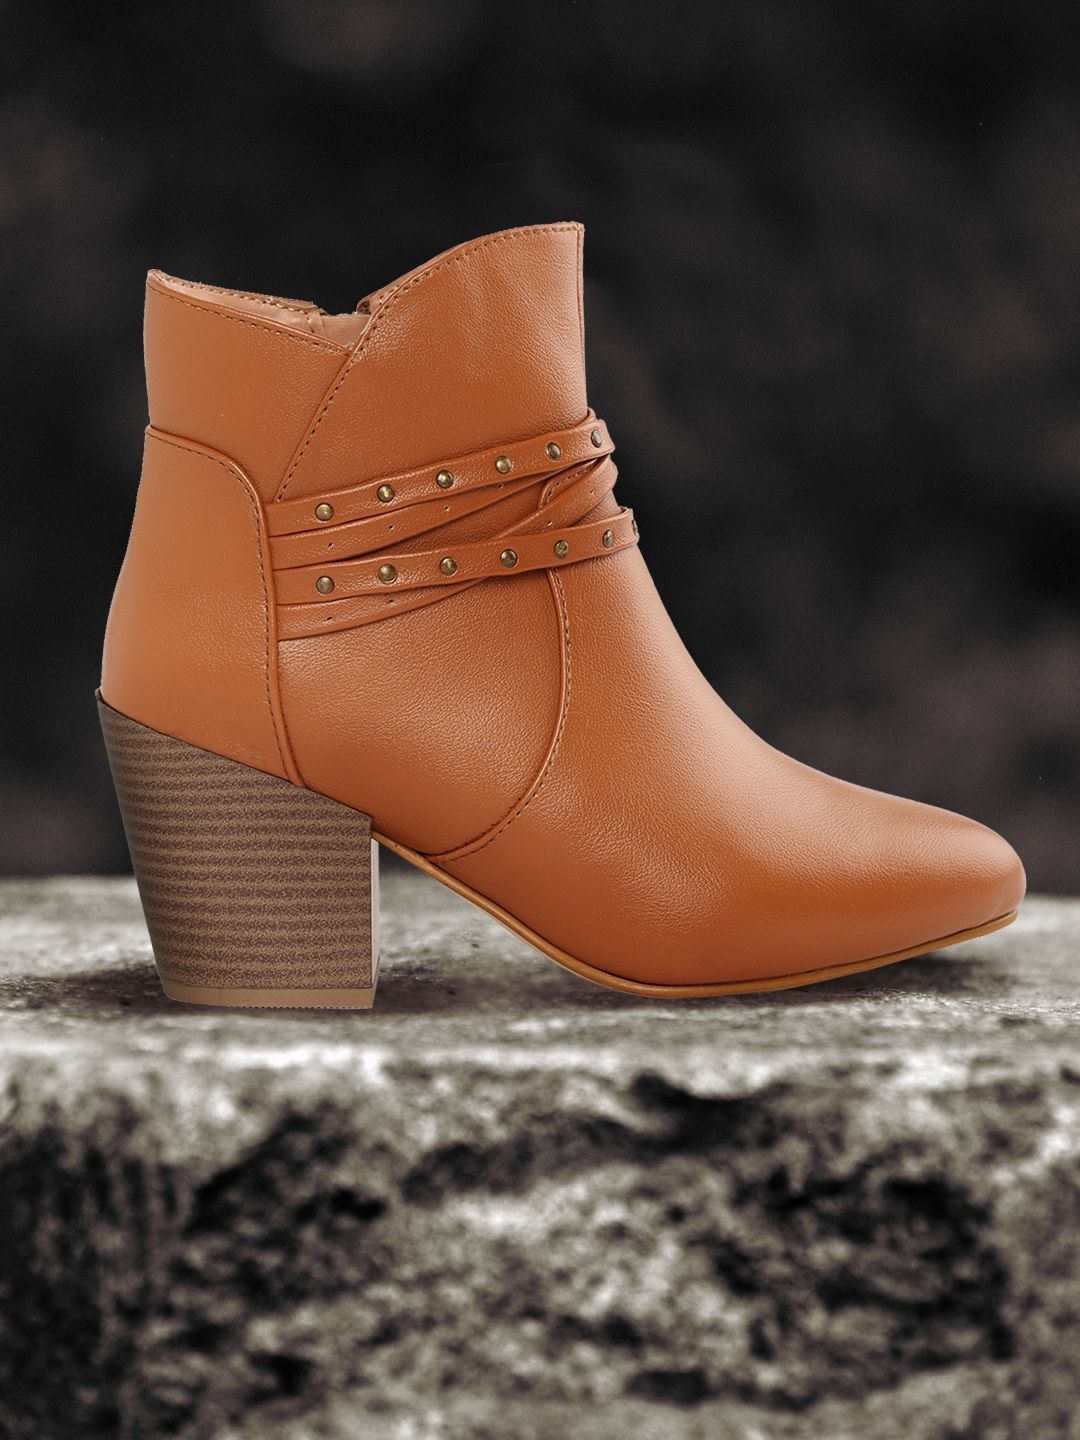 Roadster Tan Brown Block Mid-Top Heeled Boots Price in India